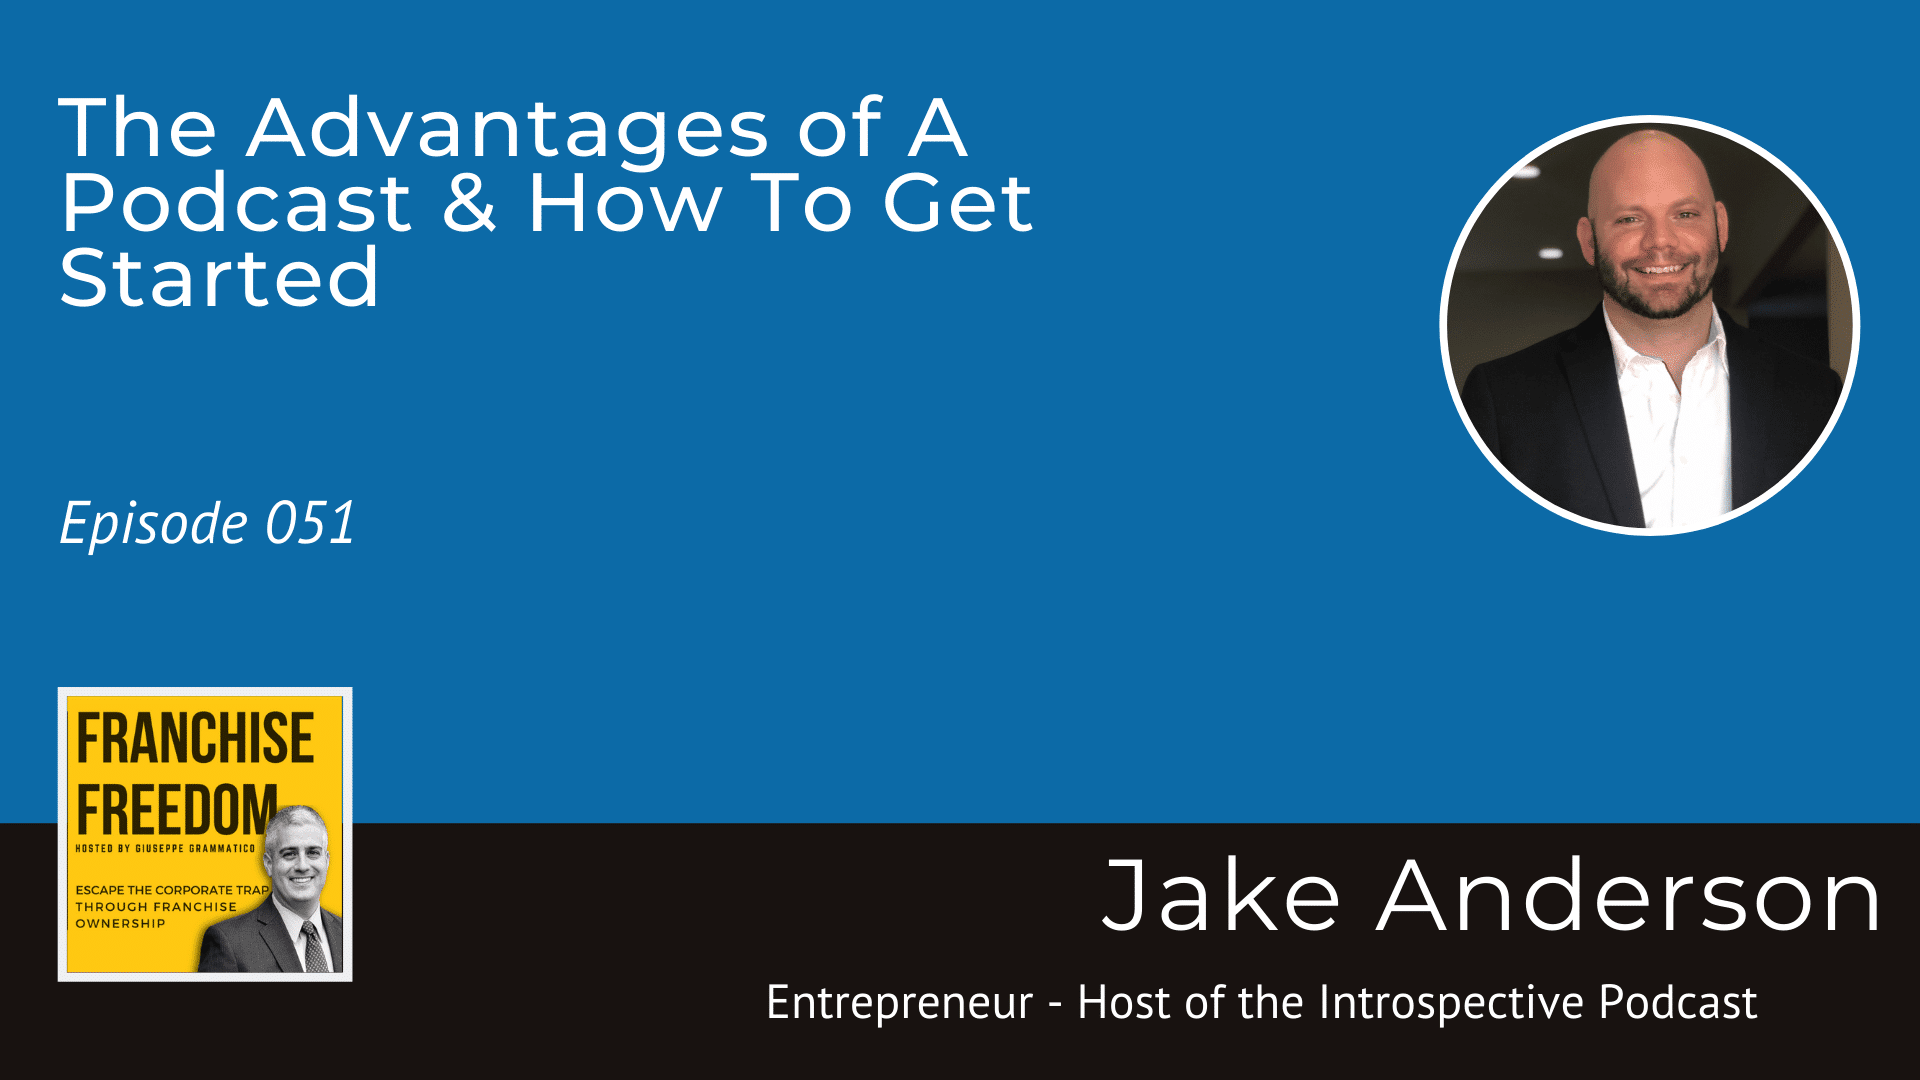 The Advantages of A Podcast & How To Get Started